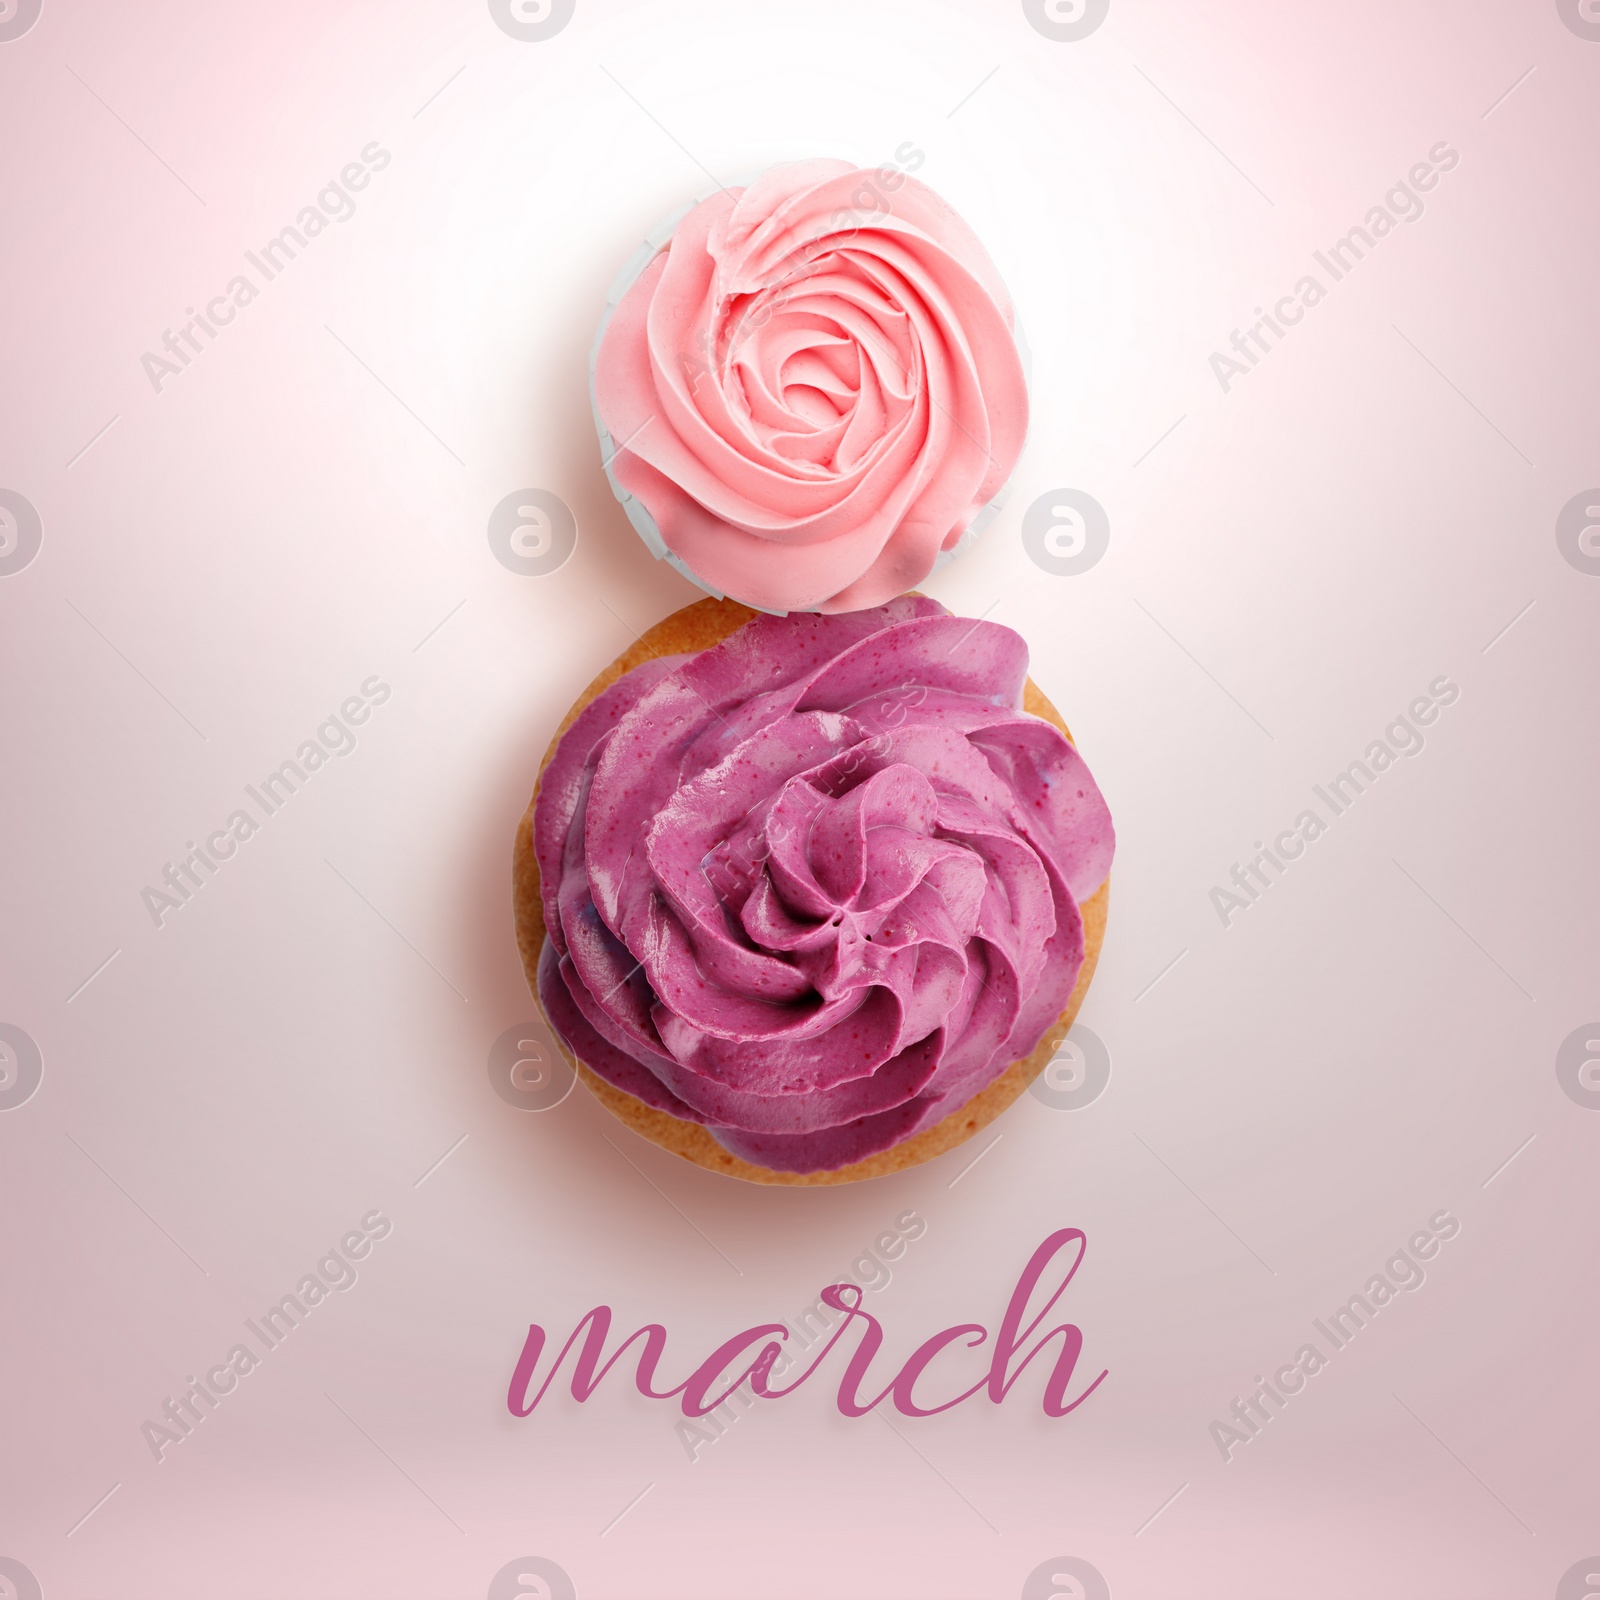 Image of 8 March - Happy International Women's Day. Card design with shape of number eight made of cupcakes on pink background, top view